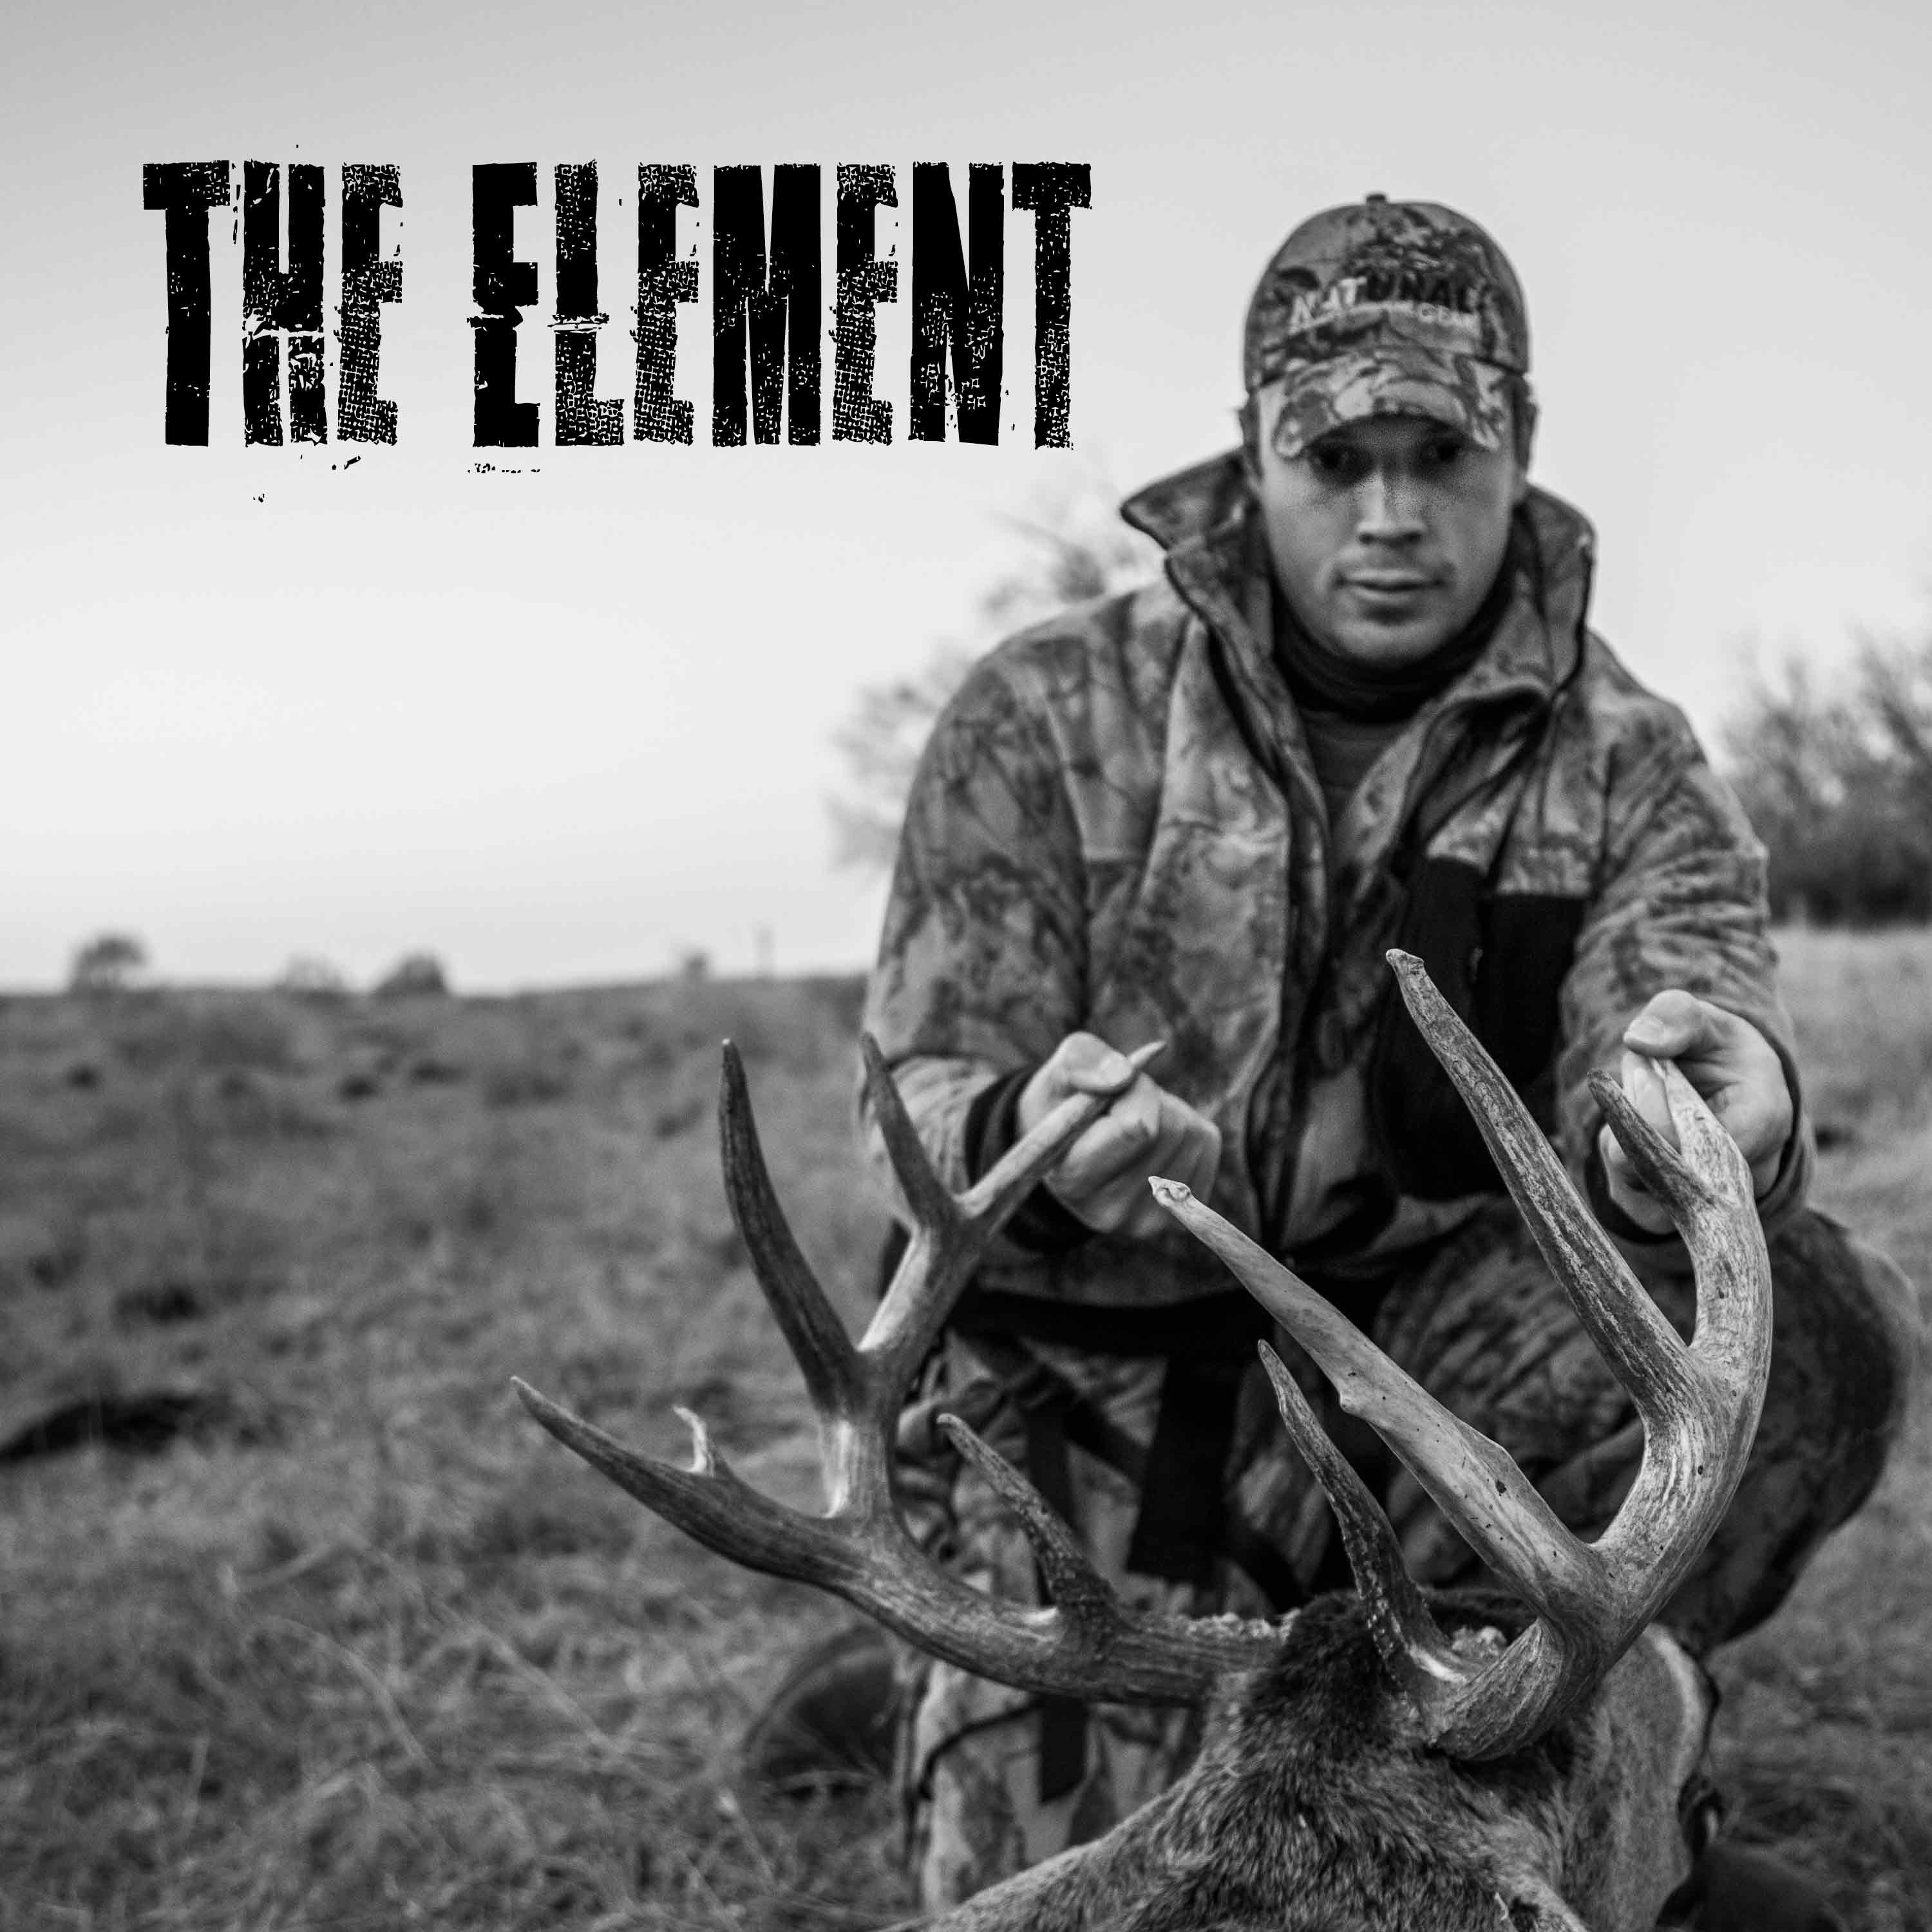 E148: WHAT WHAT, IN THE RUT??? (feat. Lindsay Thomas Jr. of The QDMA on The Crazy Southern Whitetail Rut, Hunt Fired Up Bucks All Season, Deer Restocking's Affect on The Hunting Calendar)